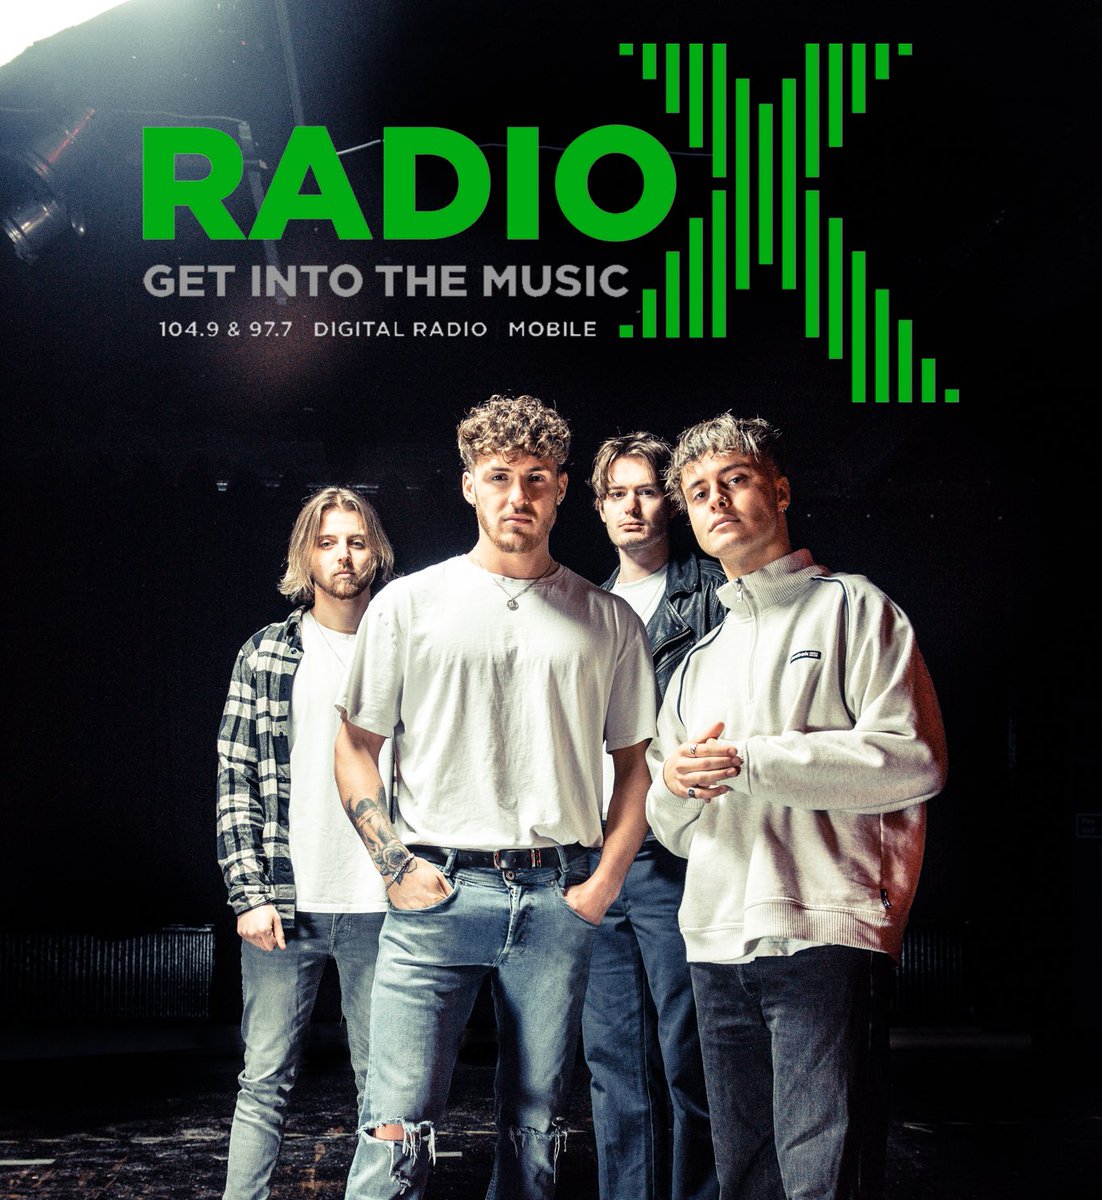 Massive thanks to @JohnKennedy at @radiox for making “Reset” his ‘Hot One’ on last nights show! 🖤💚 Thanks so much for the support!! NND x